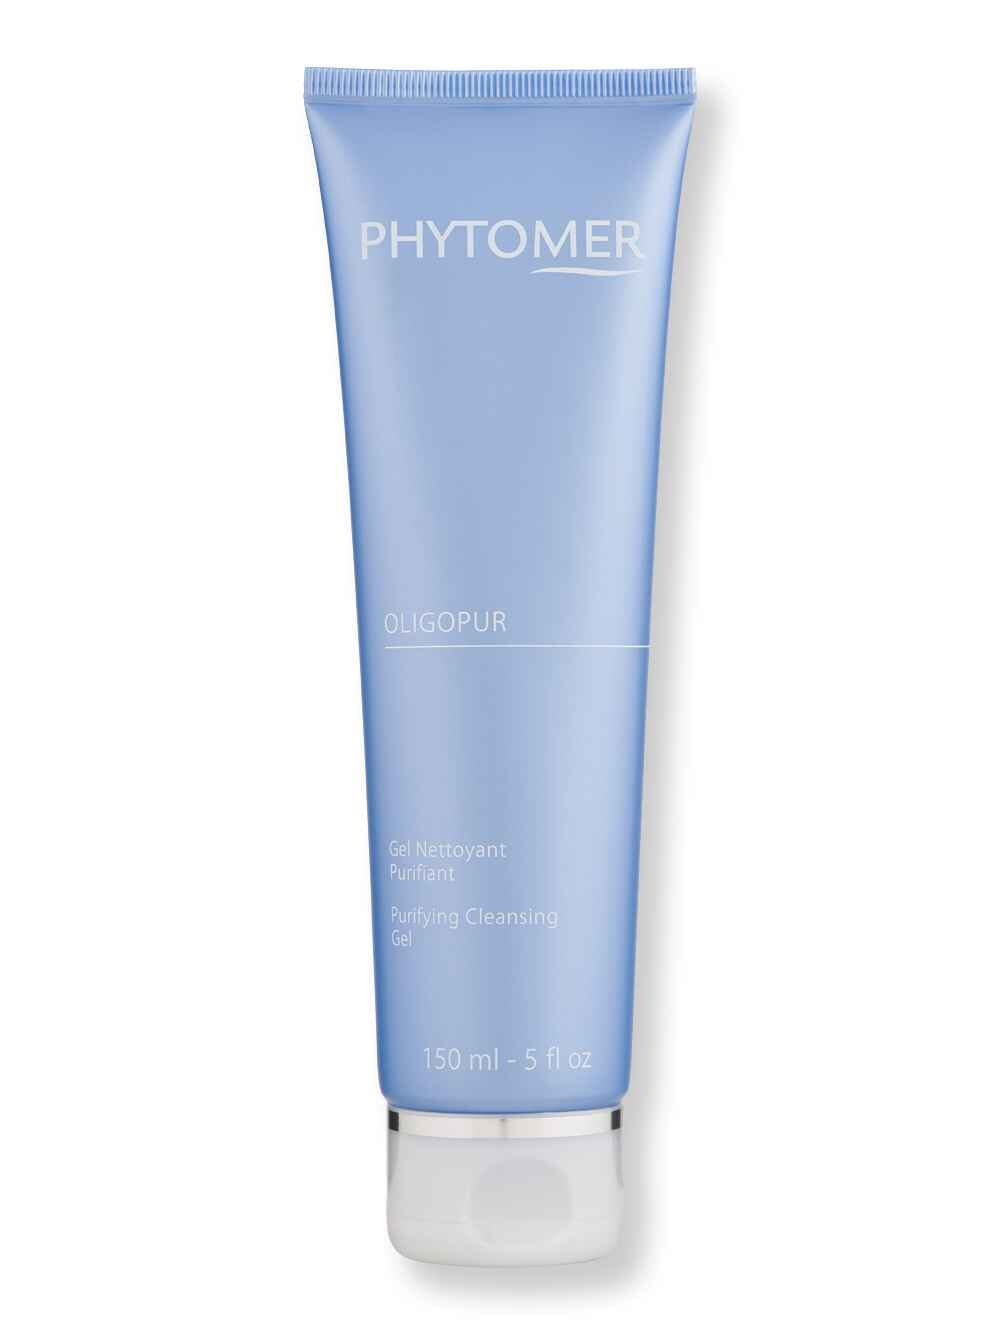 Phytomer Phytomer Oligopur Purifying Cleansing Gel 150 ml Face Cleansers 